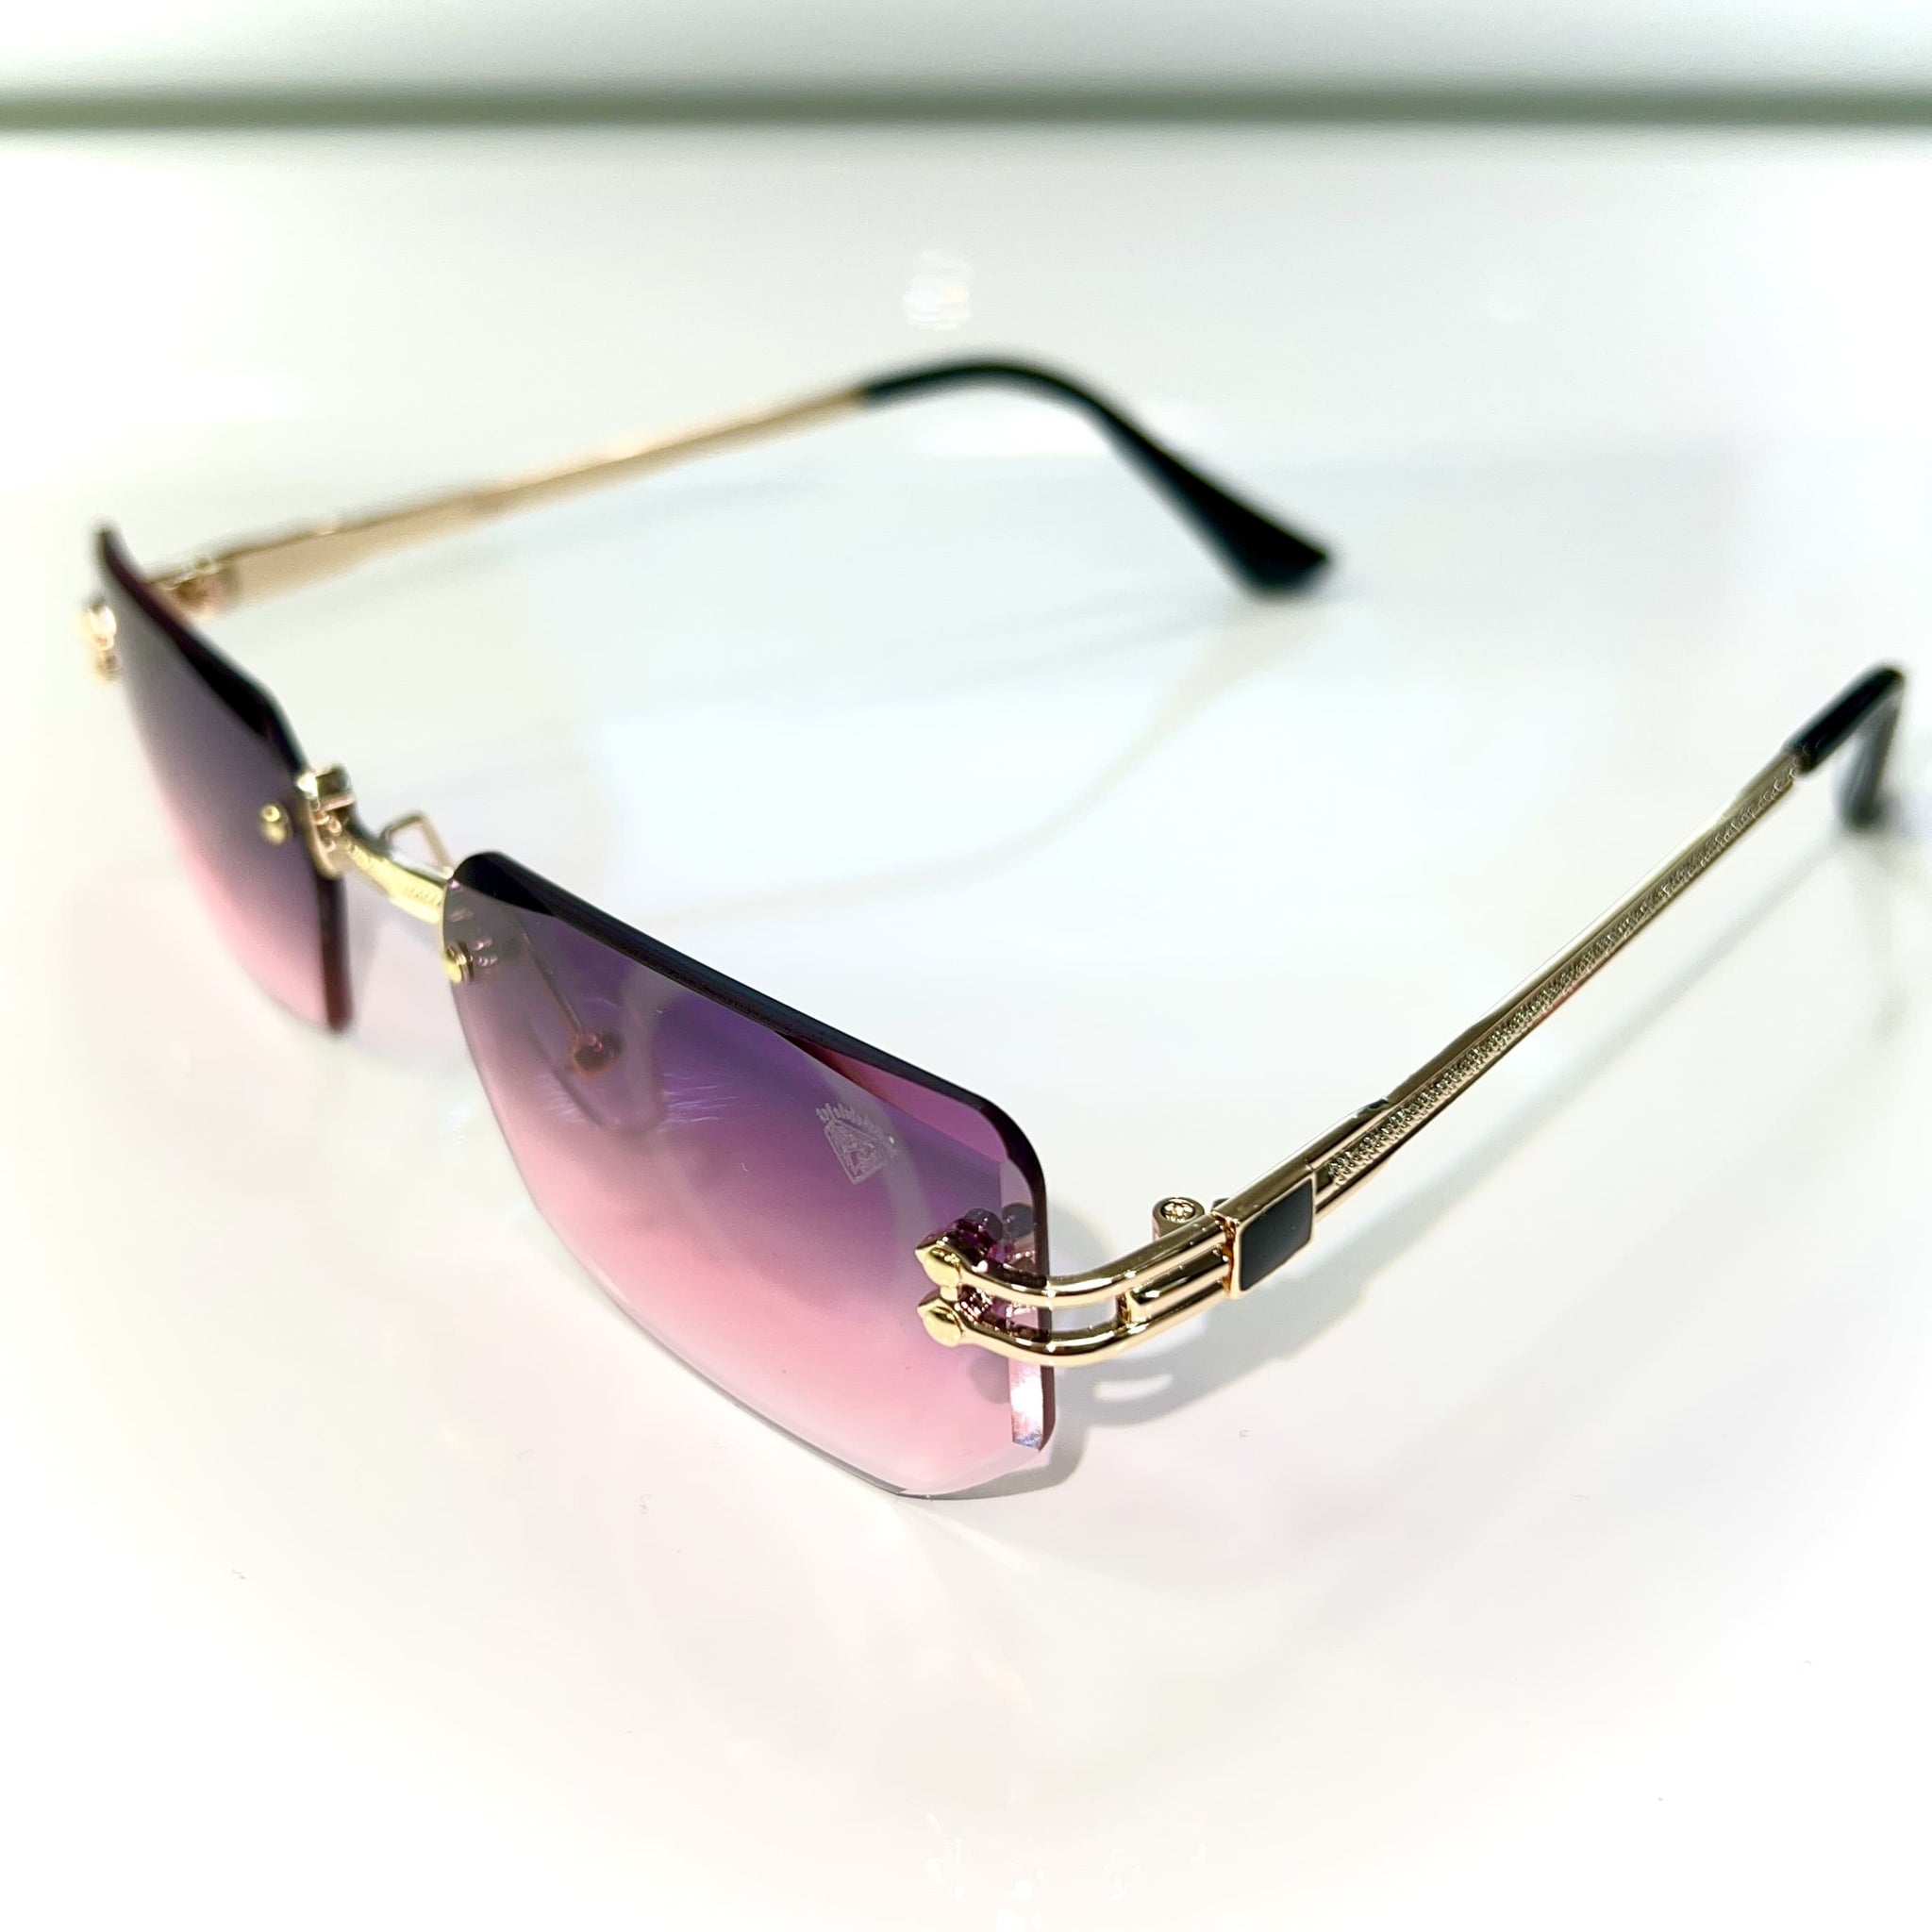 Rich Glasses - 14k gold plated - Diamond Cut - Pink / Blue Shade - Sehgal Glasses